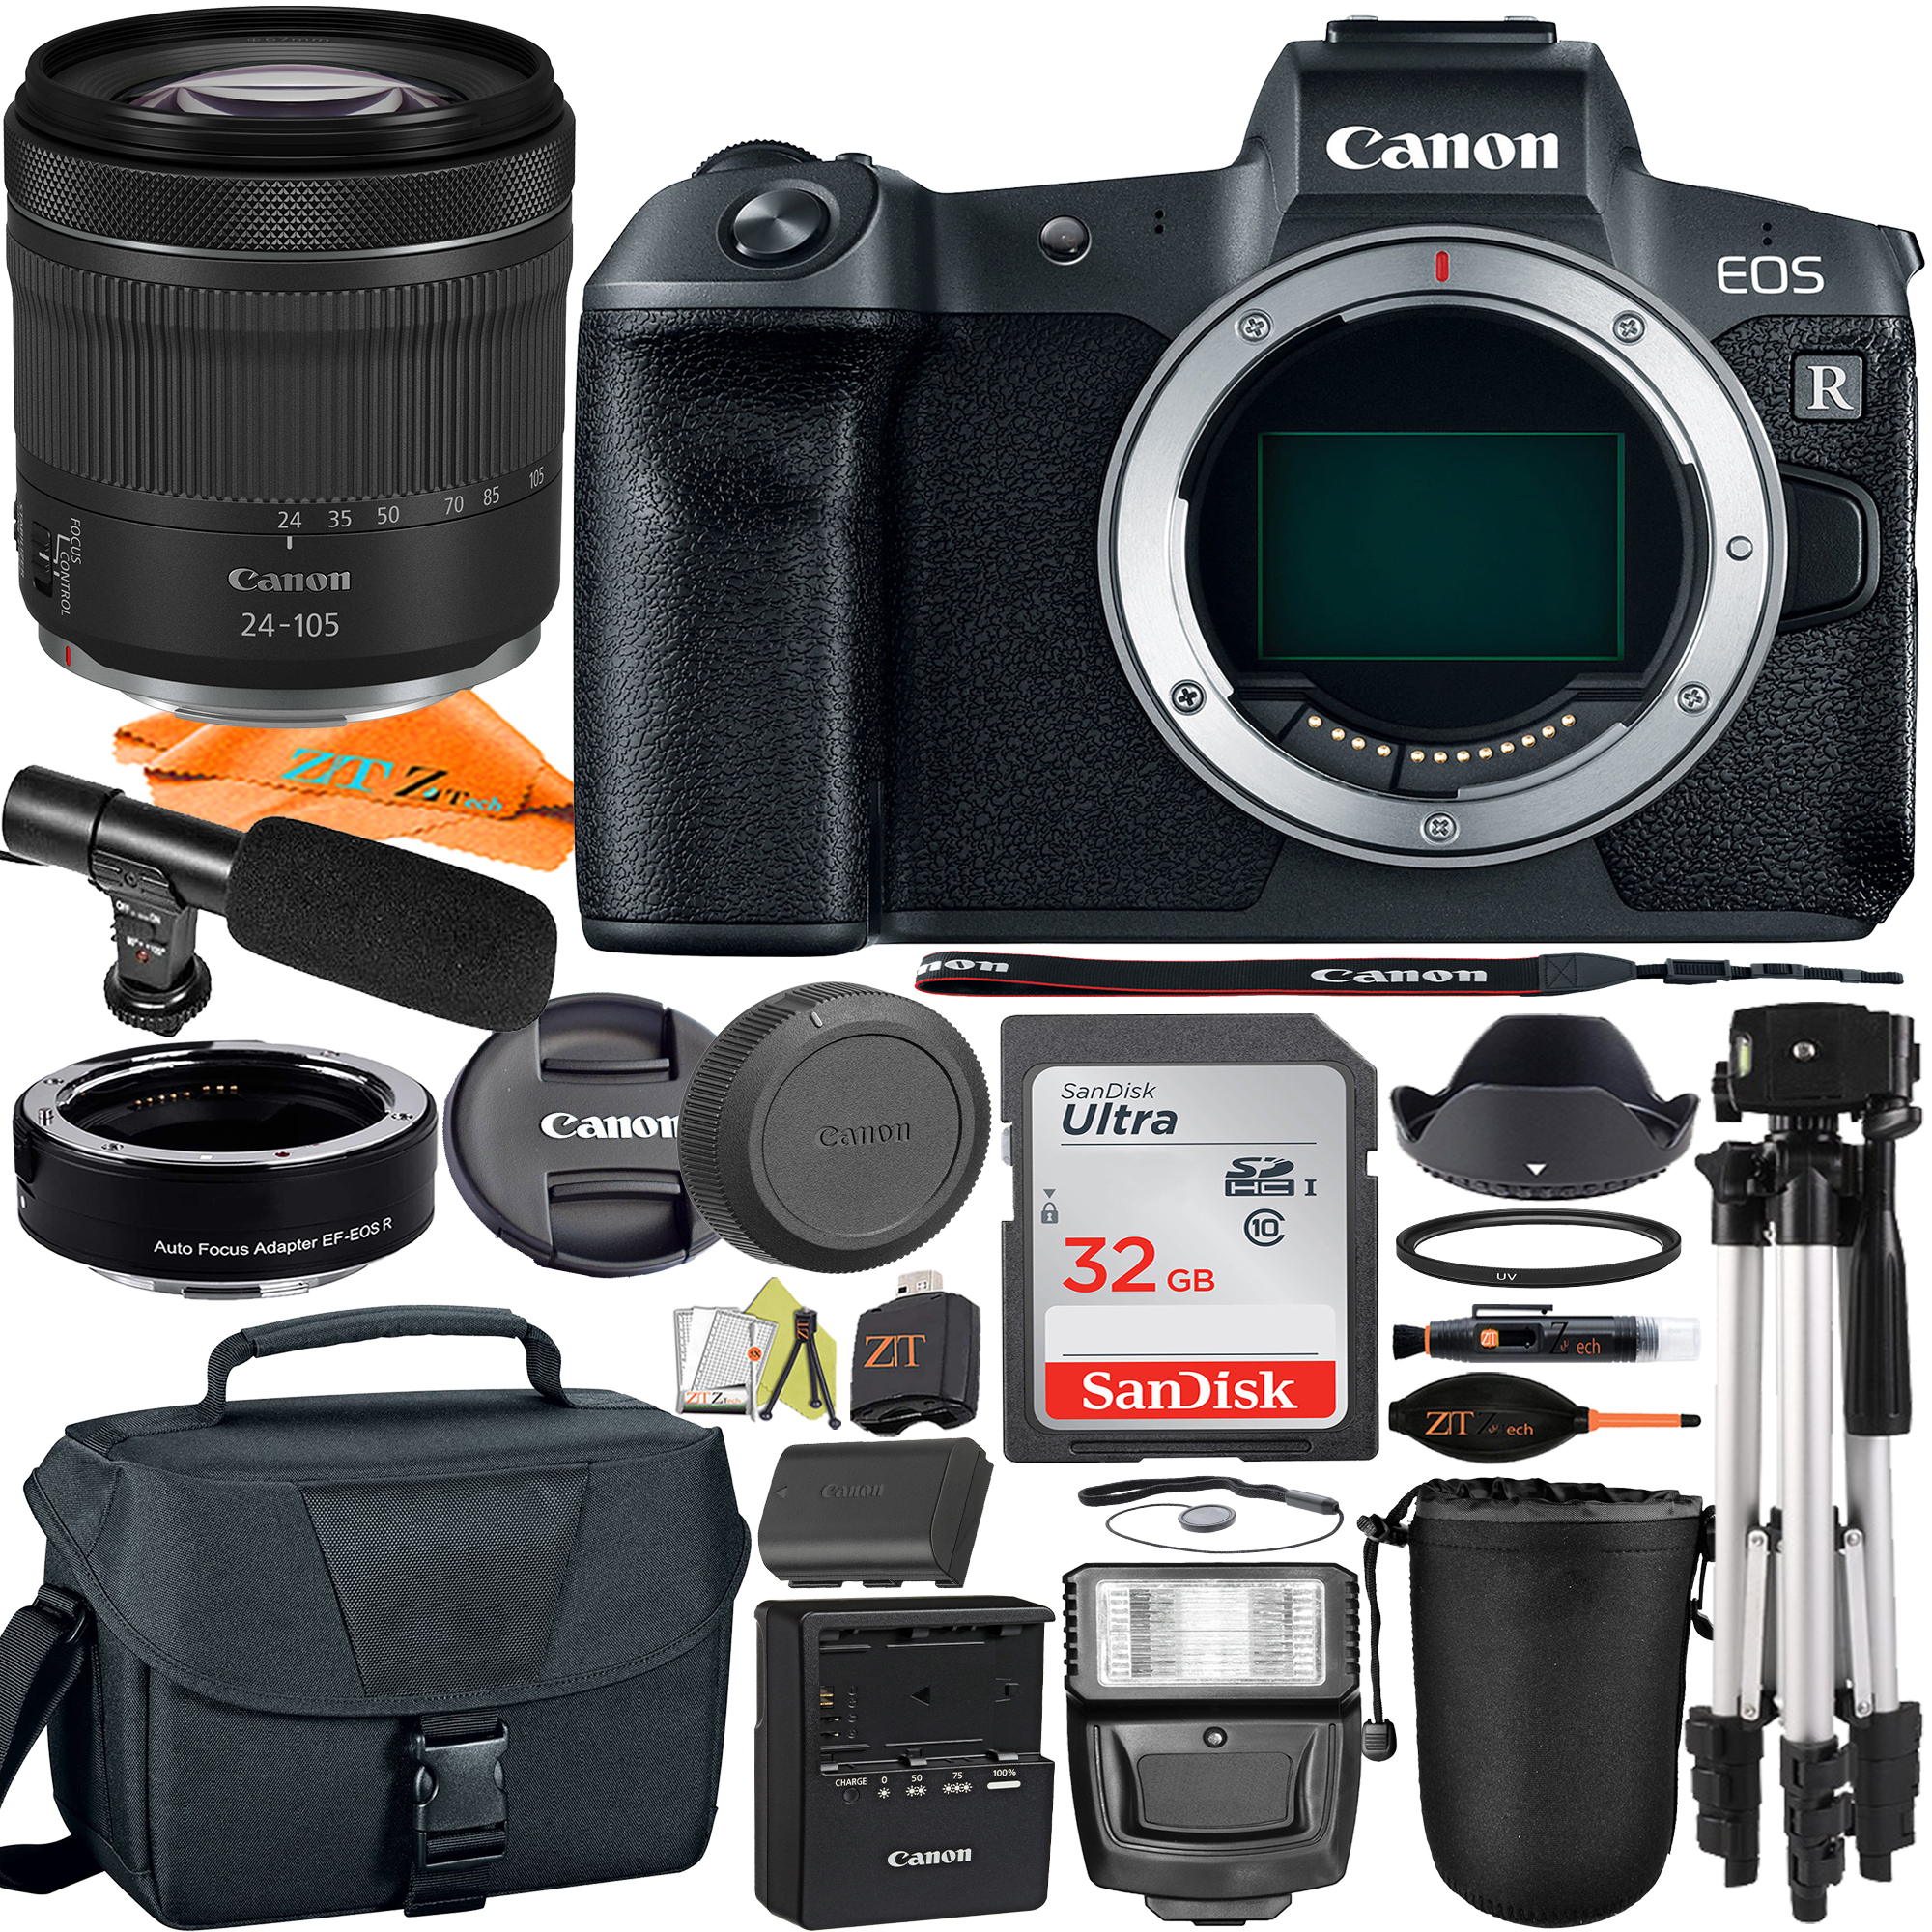 Canon EOS R Mirrorless Digital Camera with RF24-105mm Lens + Mount Adapter + SanDisk 32GB + Case + ZeeTech Accessory Bundle